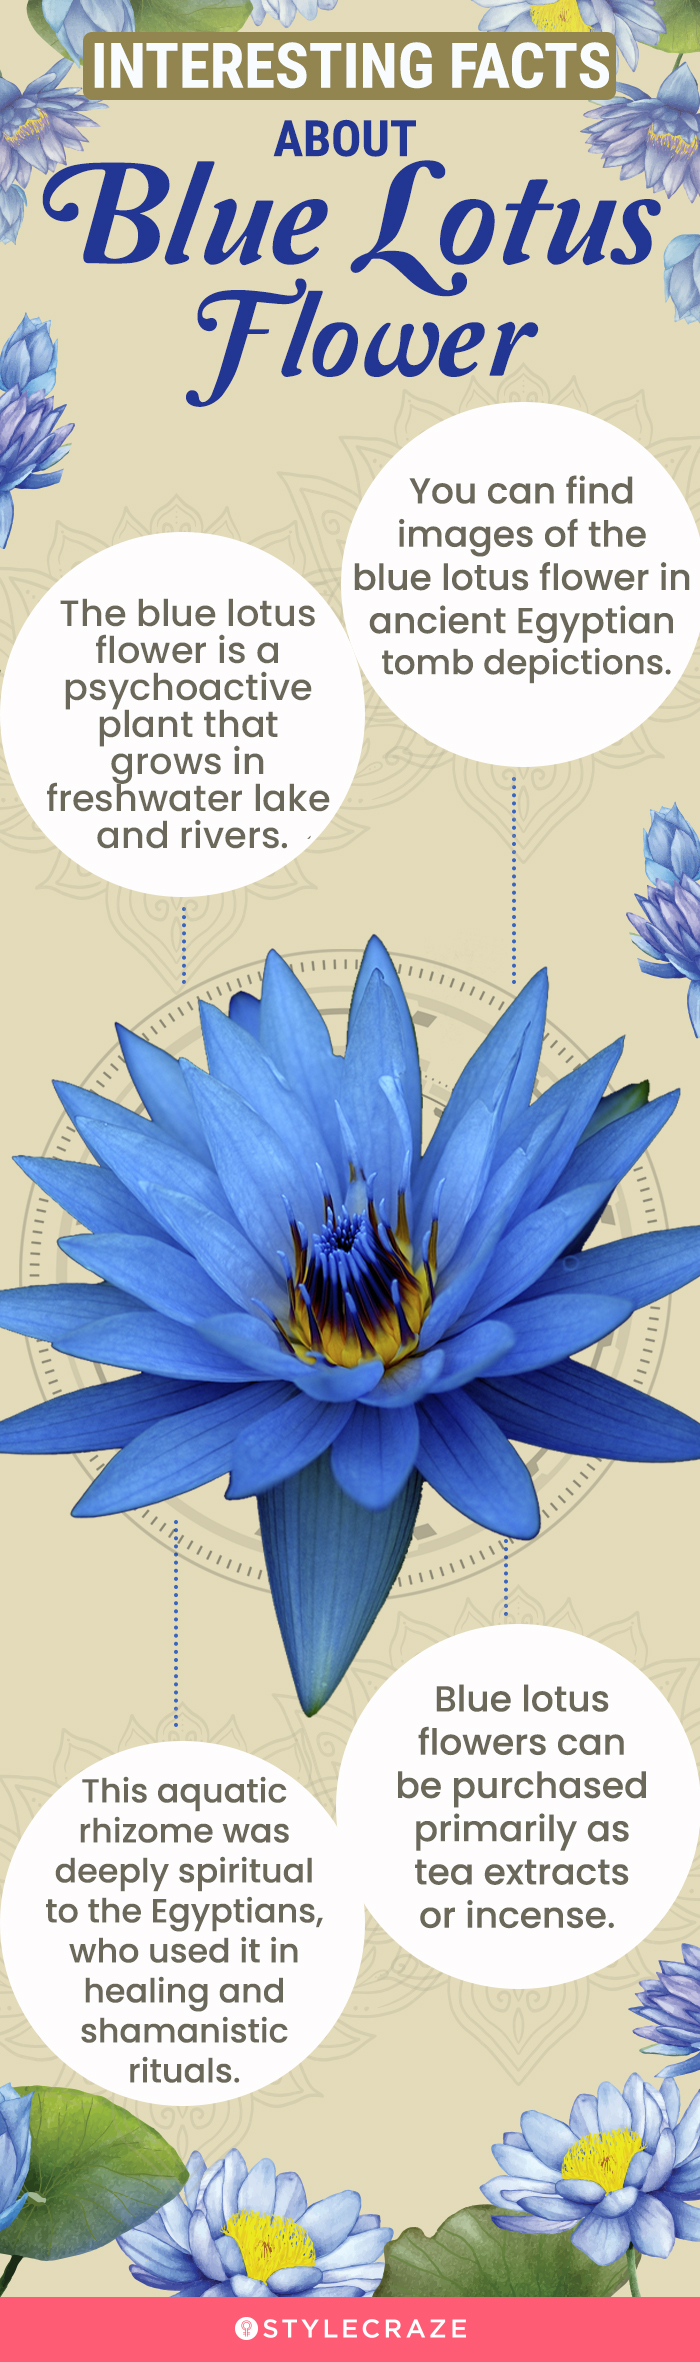 interesting facts about blue lotus (infographic)